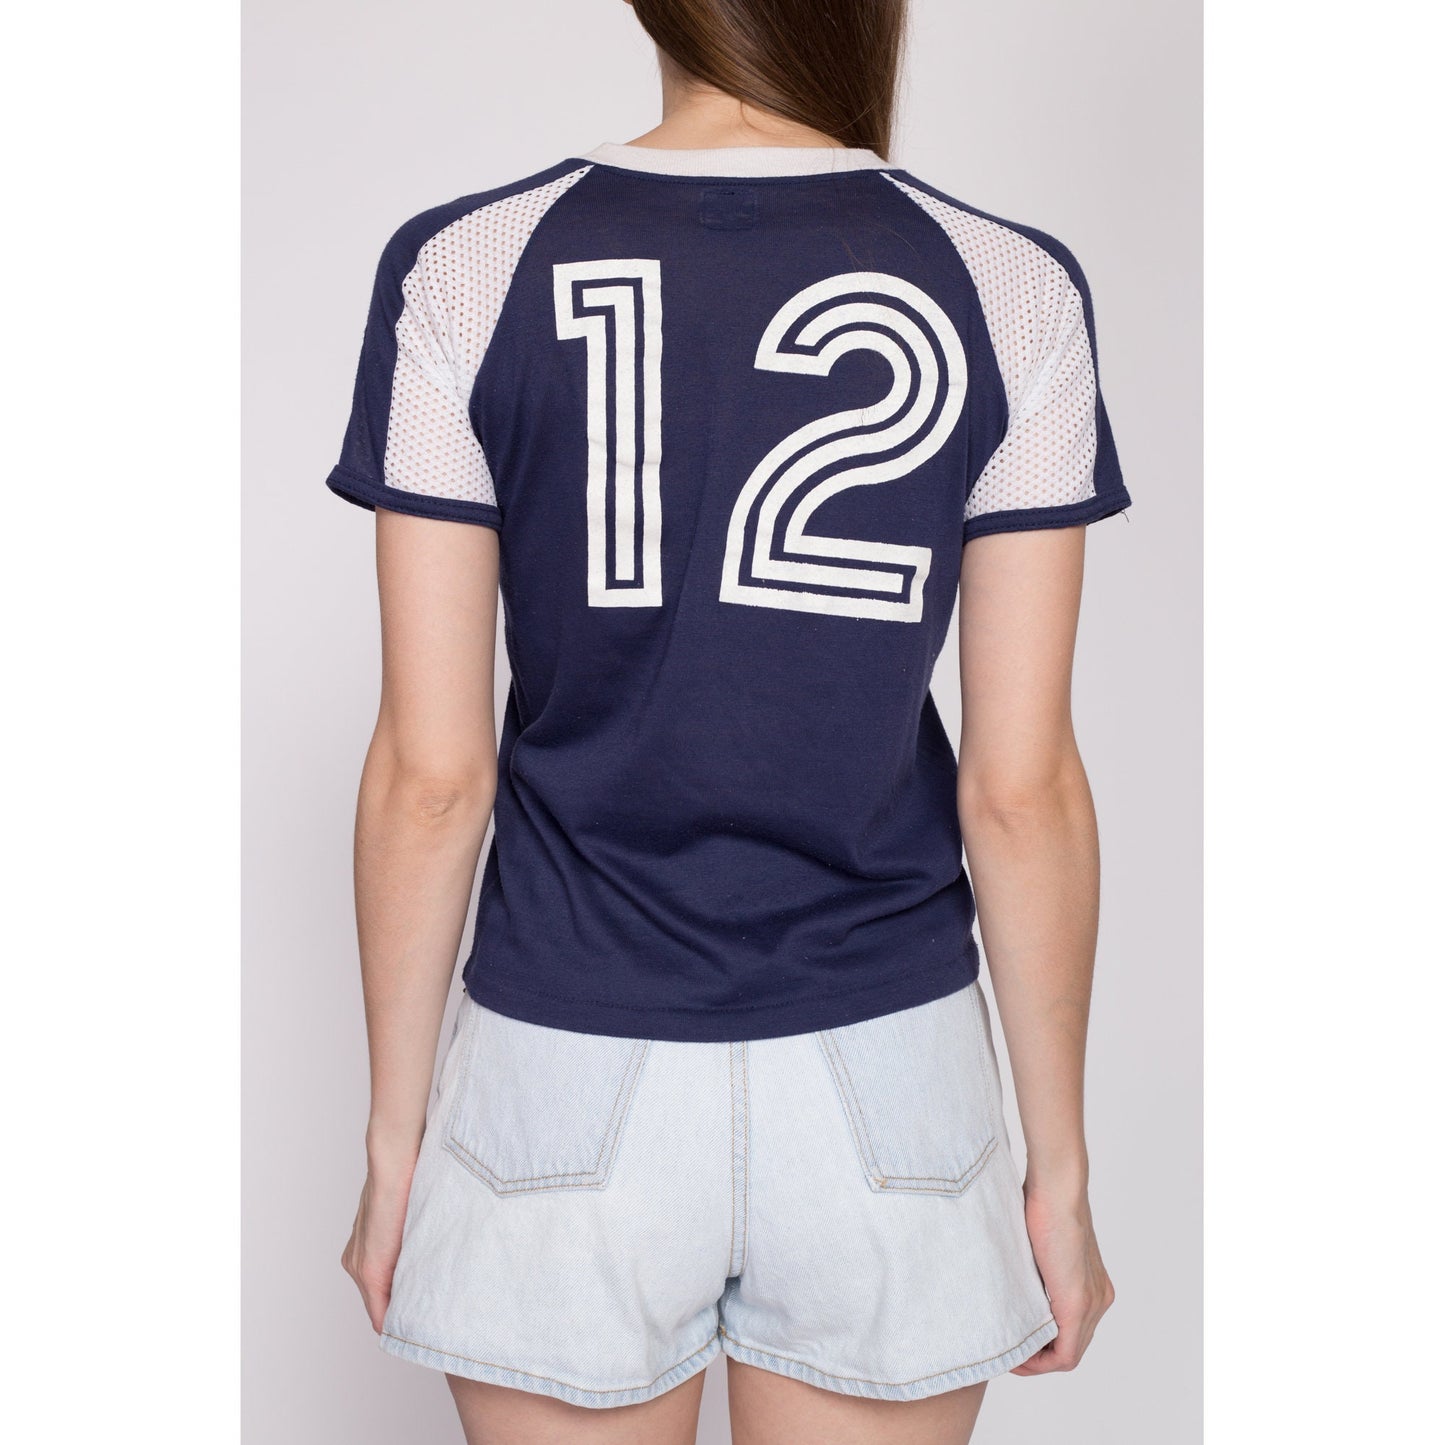 XS| 70s Navy Blue Mesh Soccer Jersey Tee - Extra Small | Vintage Ringer Trim Retro Fitted Sporty T Shirt